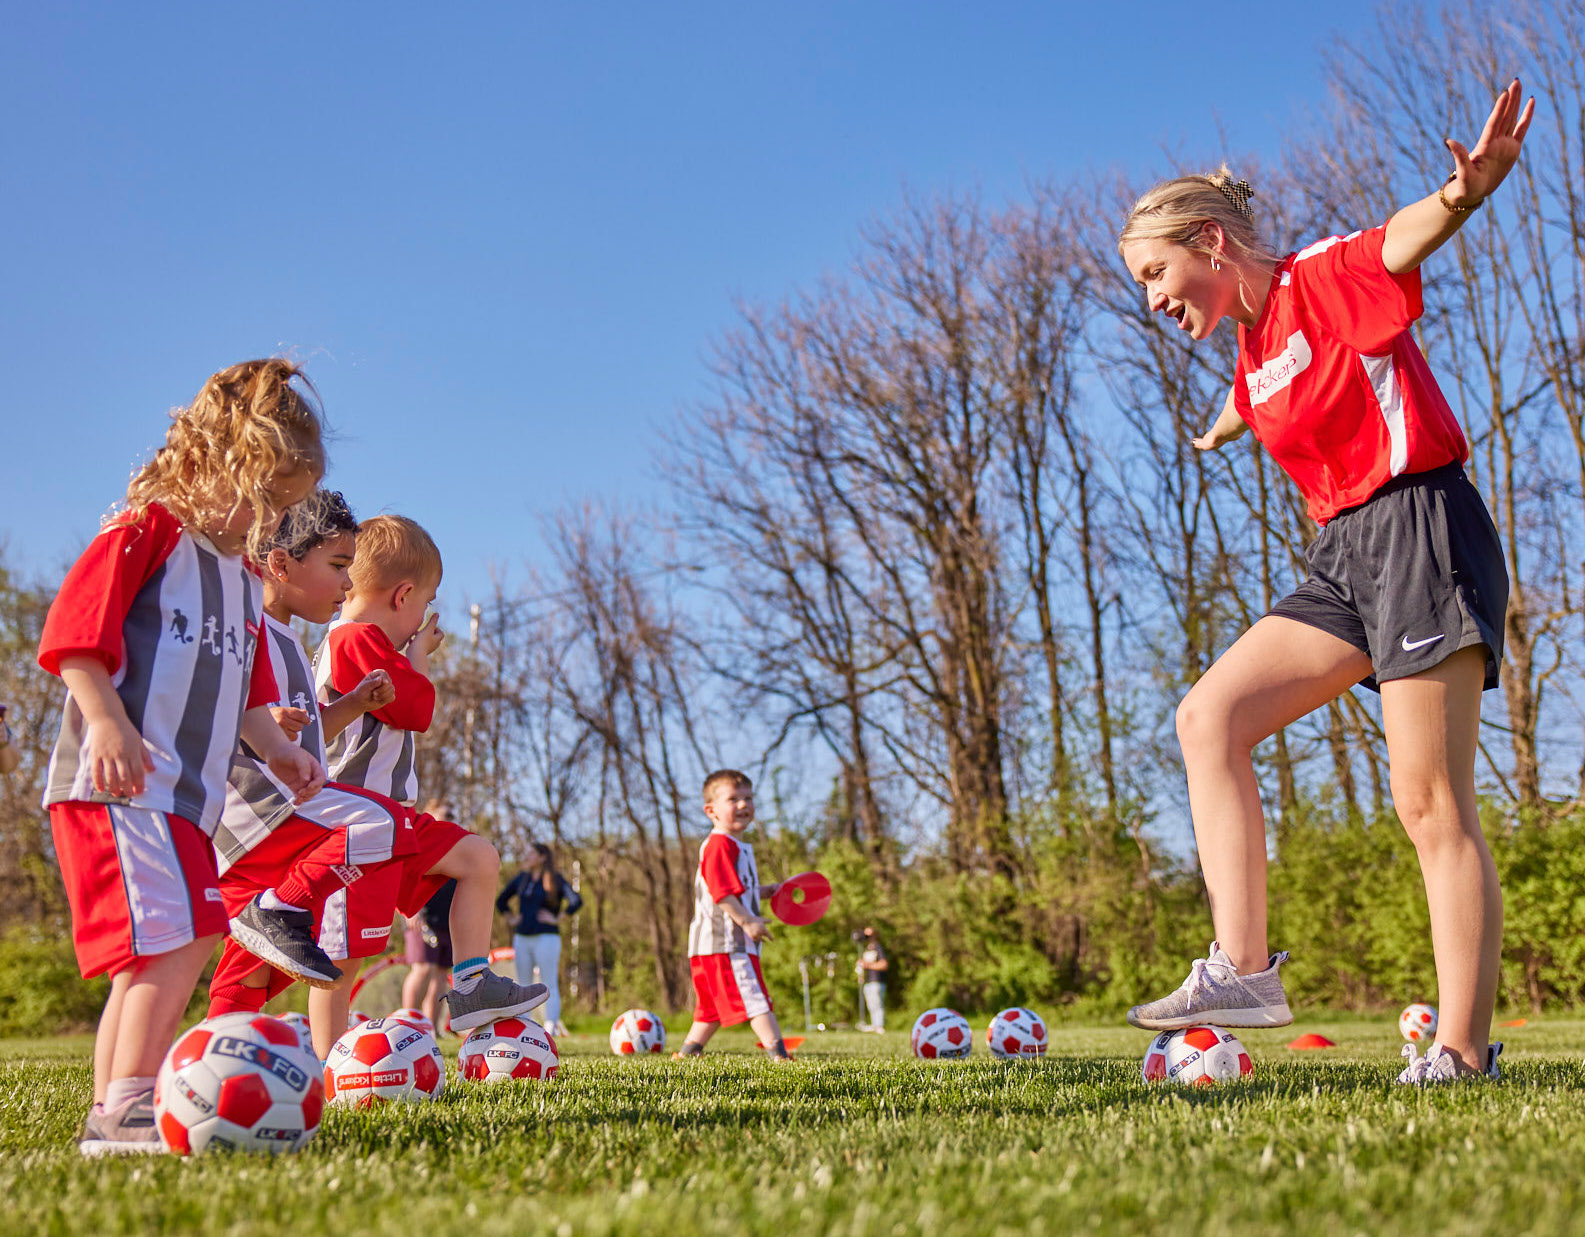 Little Kickers – Worthing– Durrington Recreation Ground. 2 FREE TRIALS AVAILABLE!